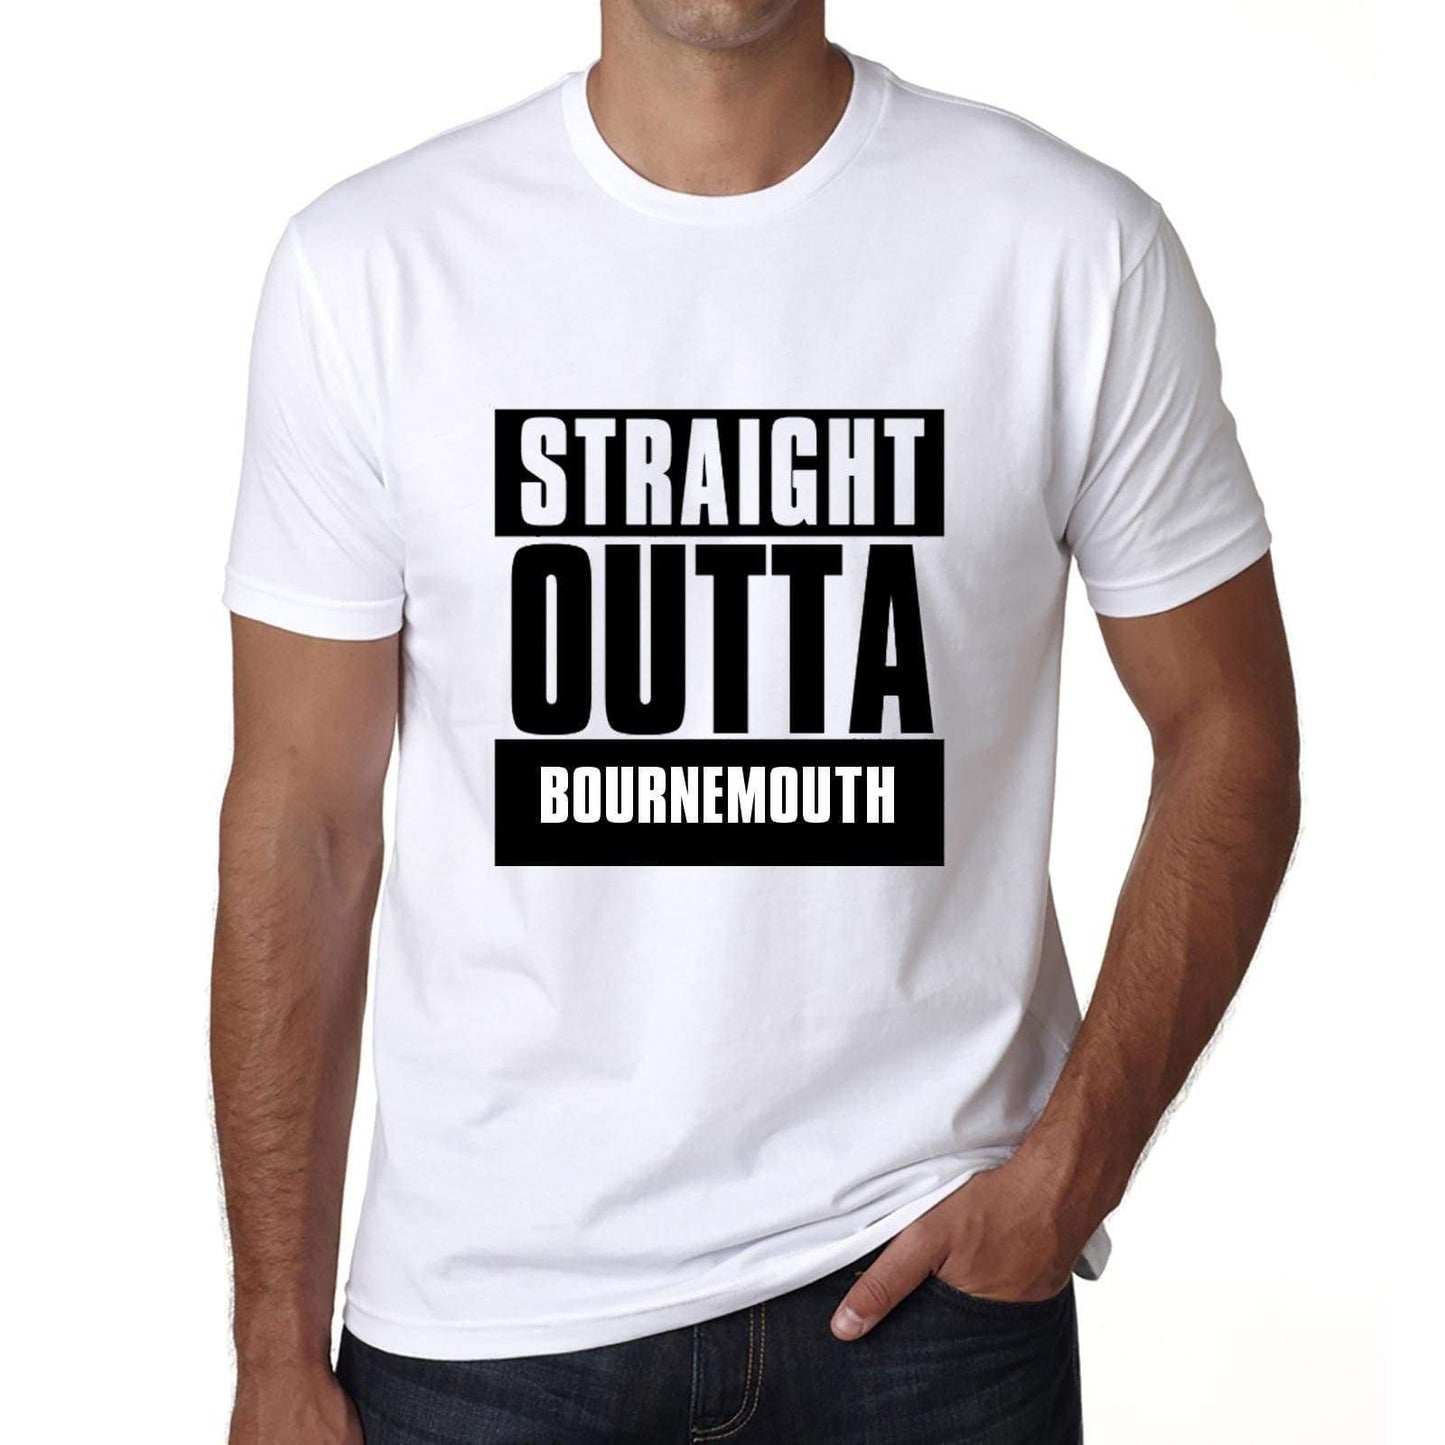 Straight Outta Bournemouth Mens Short Sleeve Round Neck T-Shirt 00027 - White / S - Casual